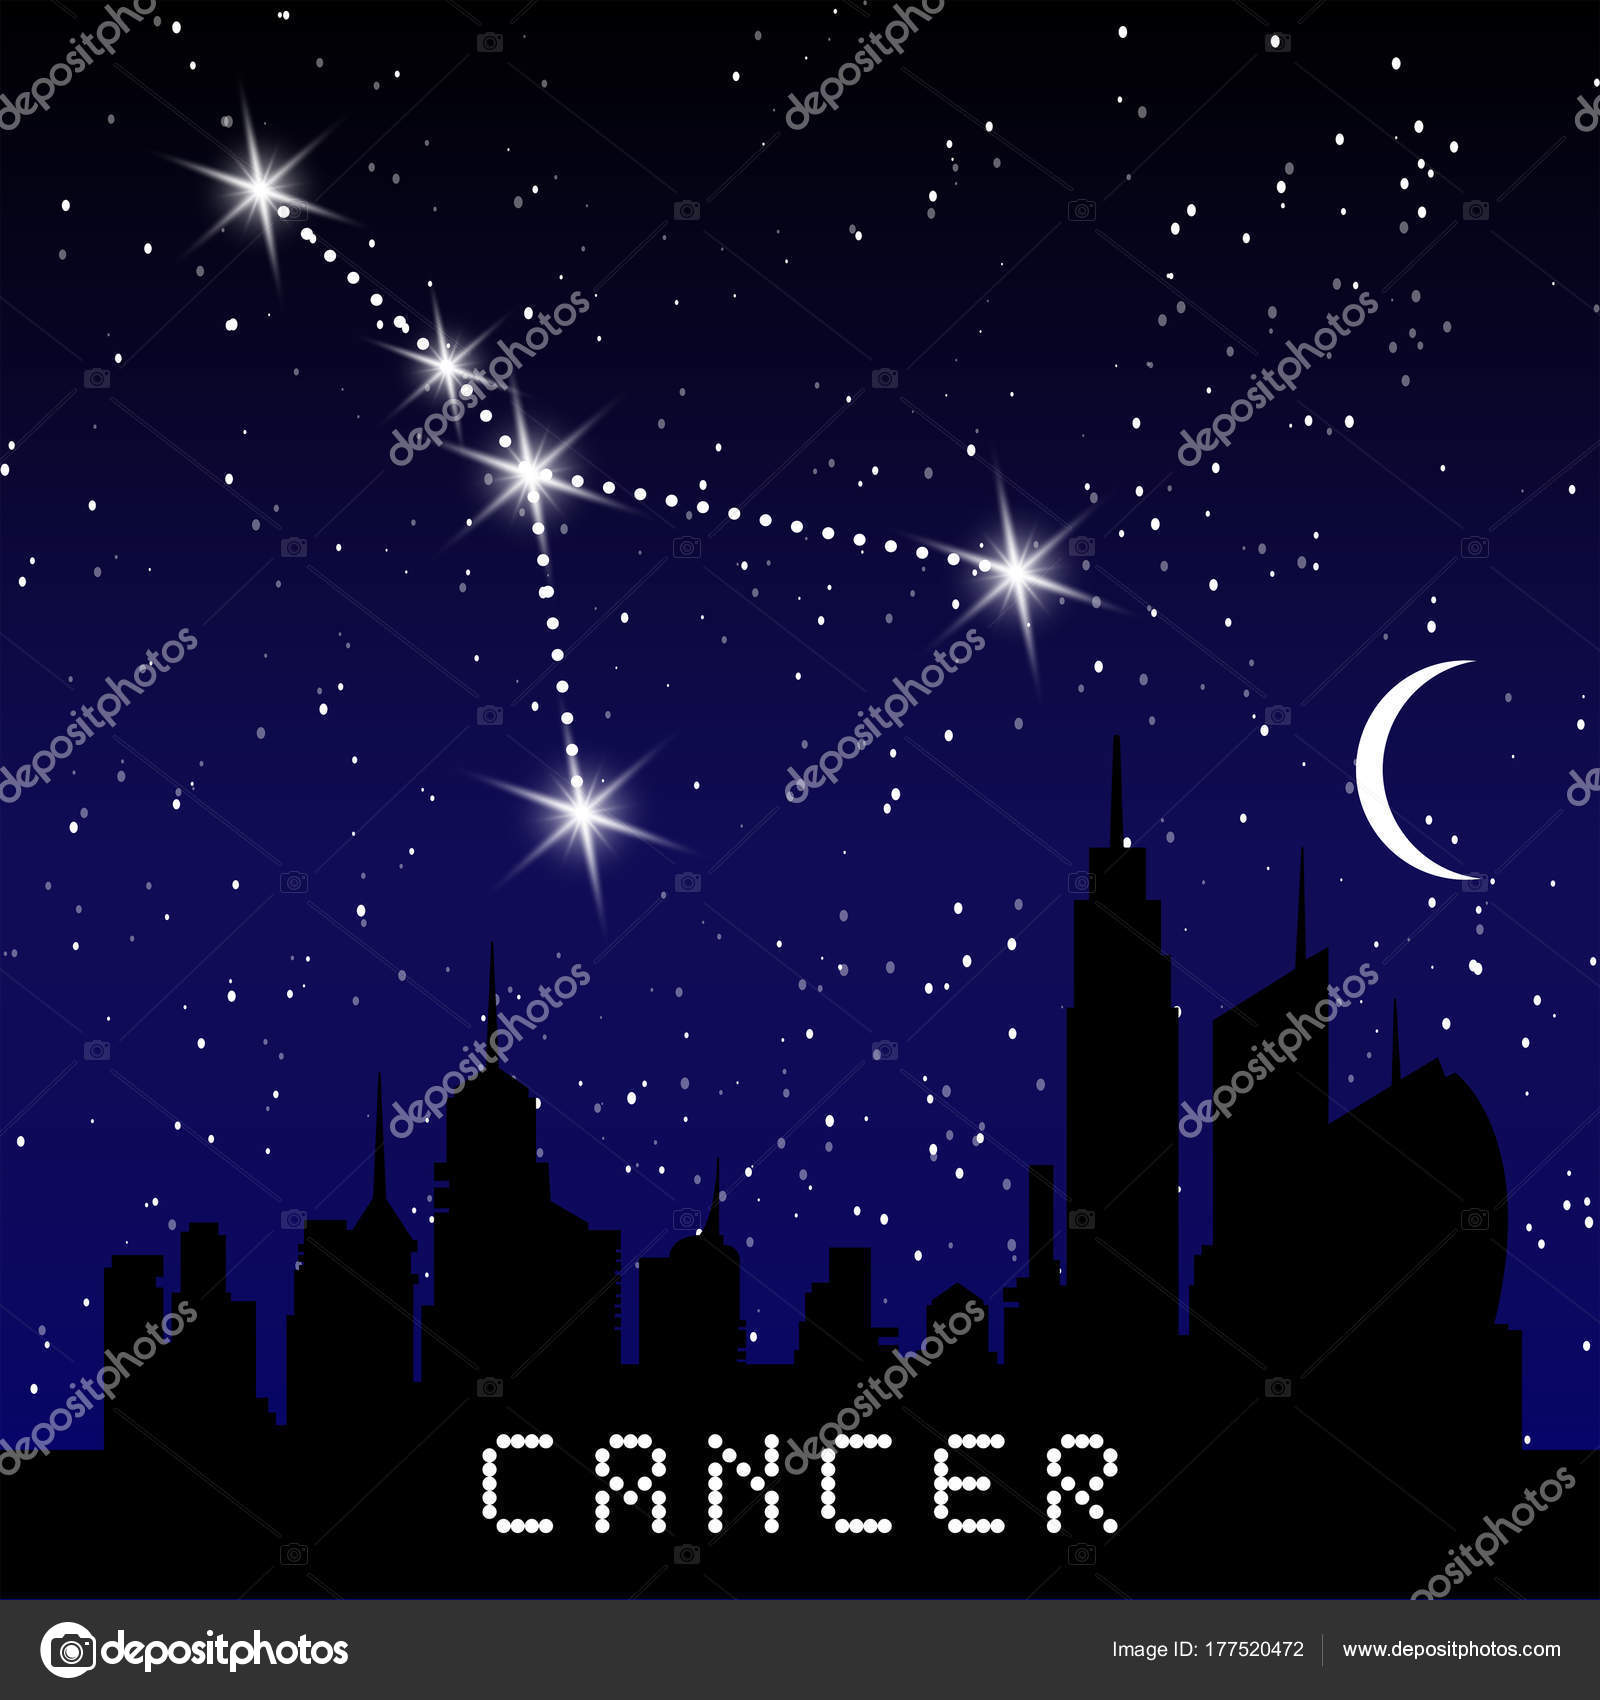 Cancer Zodiac Constellations Sign On Beautiful Starry Sky With Galaxy